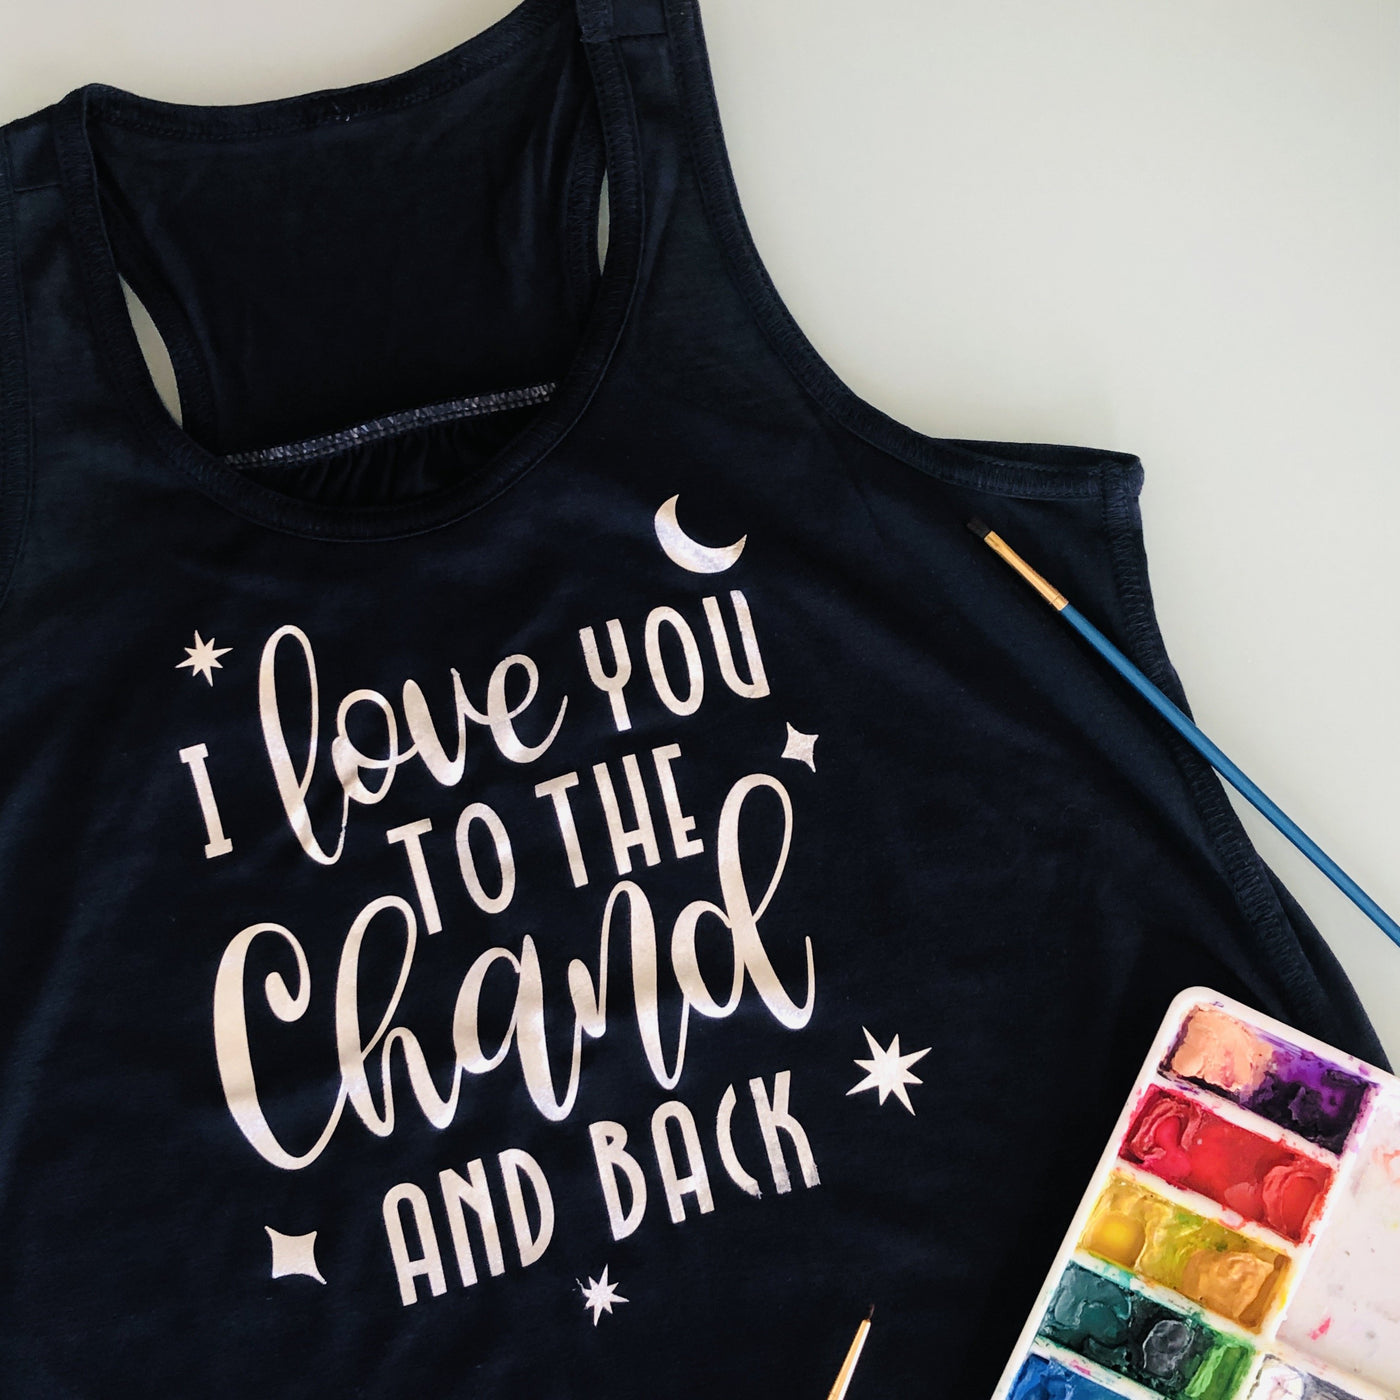 I Love you the Chand and Back Kids Tank Top